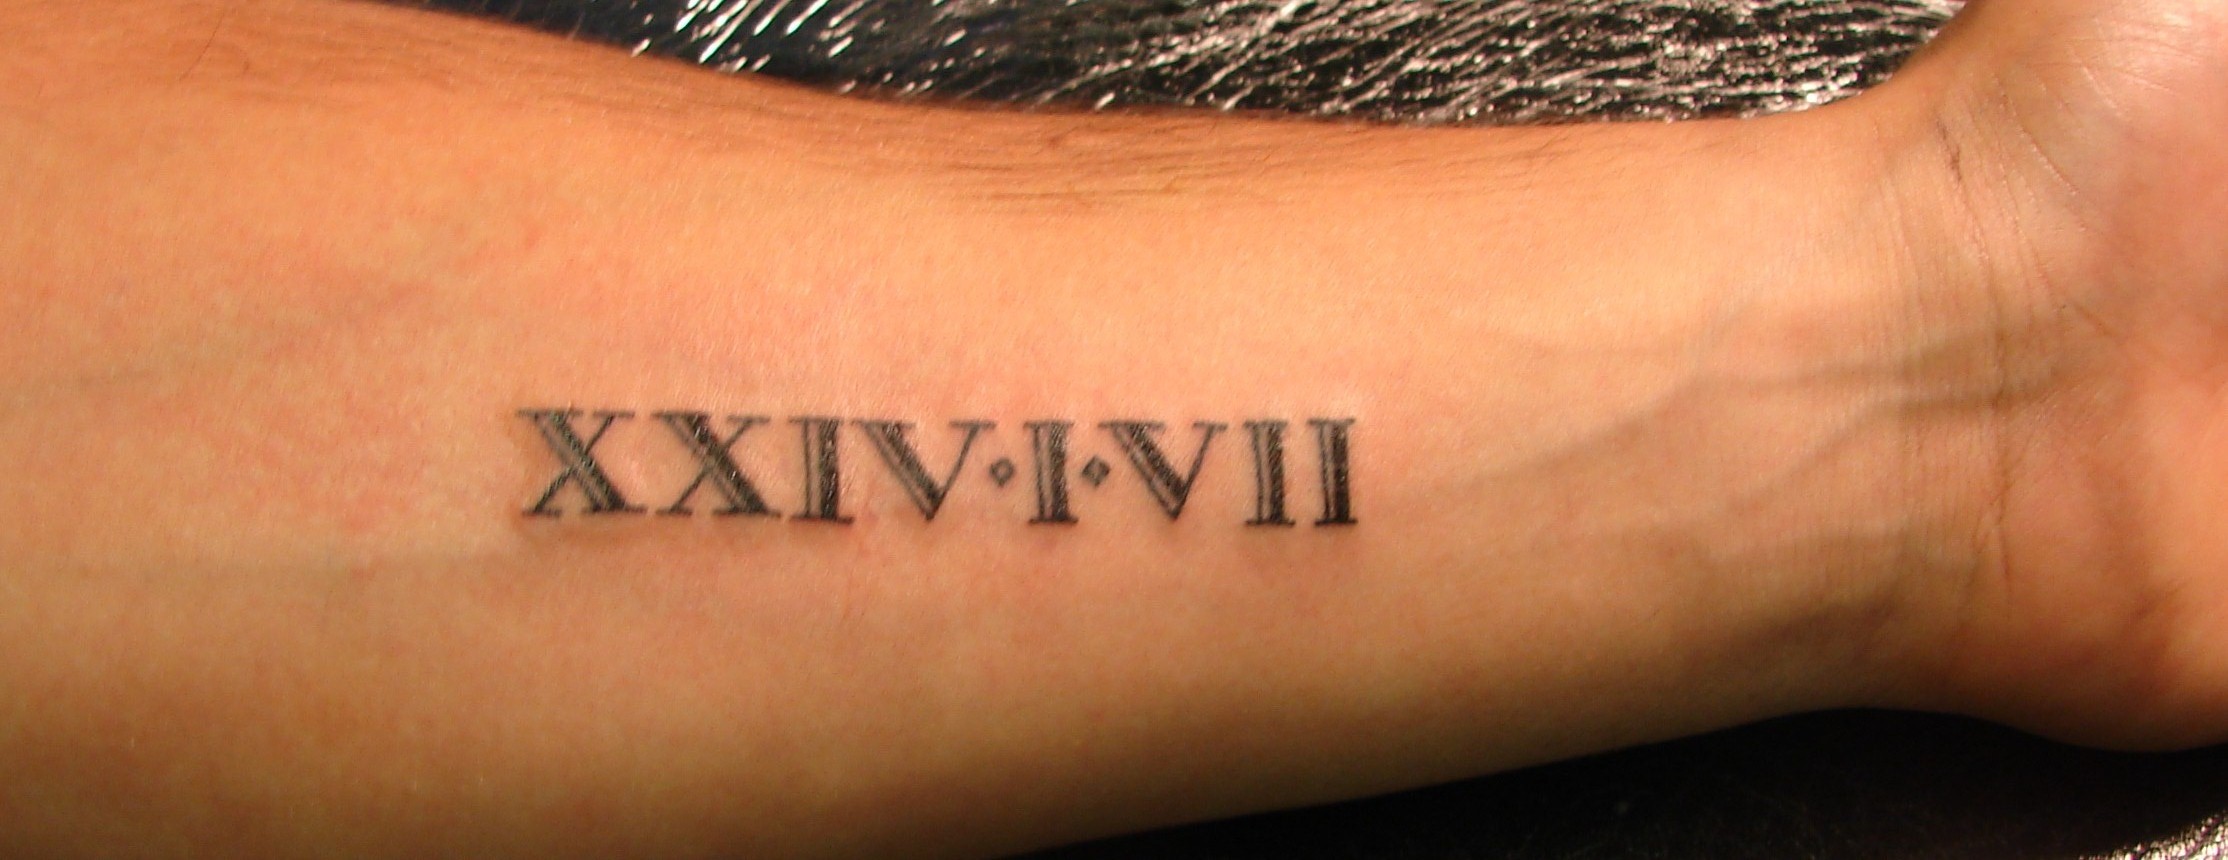 2. "Meaningful 2019 Roman Numerals Tattoos" - wide 10